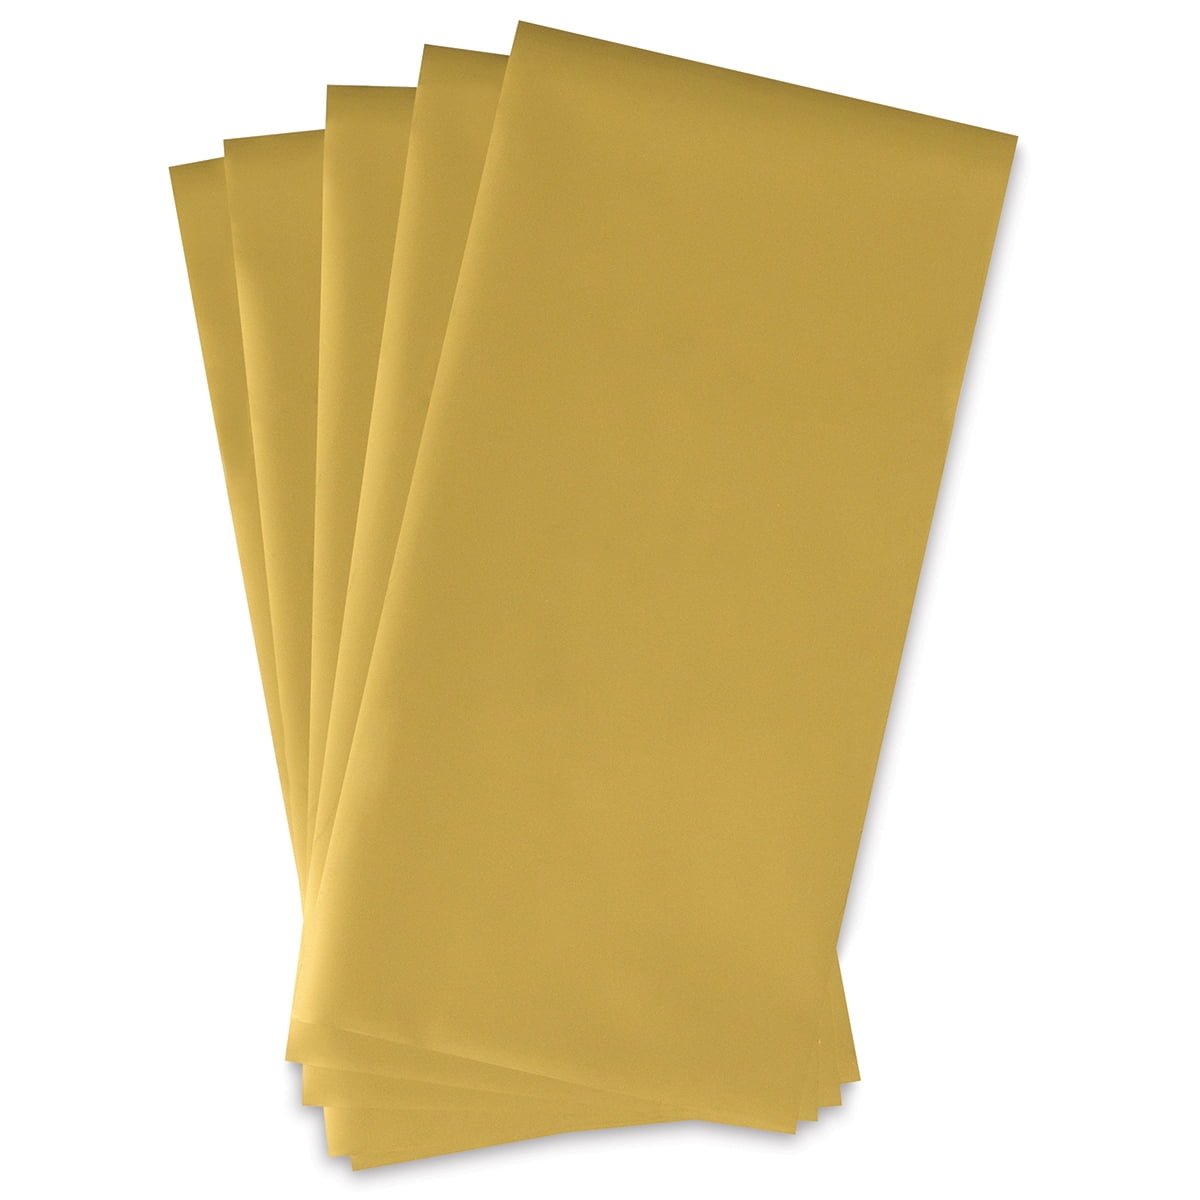 Crafters Square Permanent Adhesive Vinyl Paper Yellow (3 Packs) Glossy